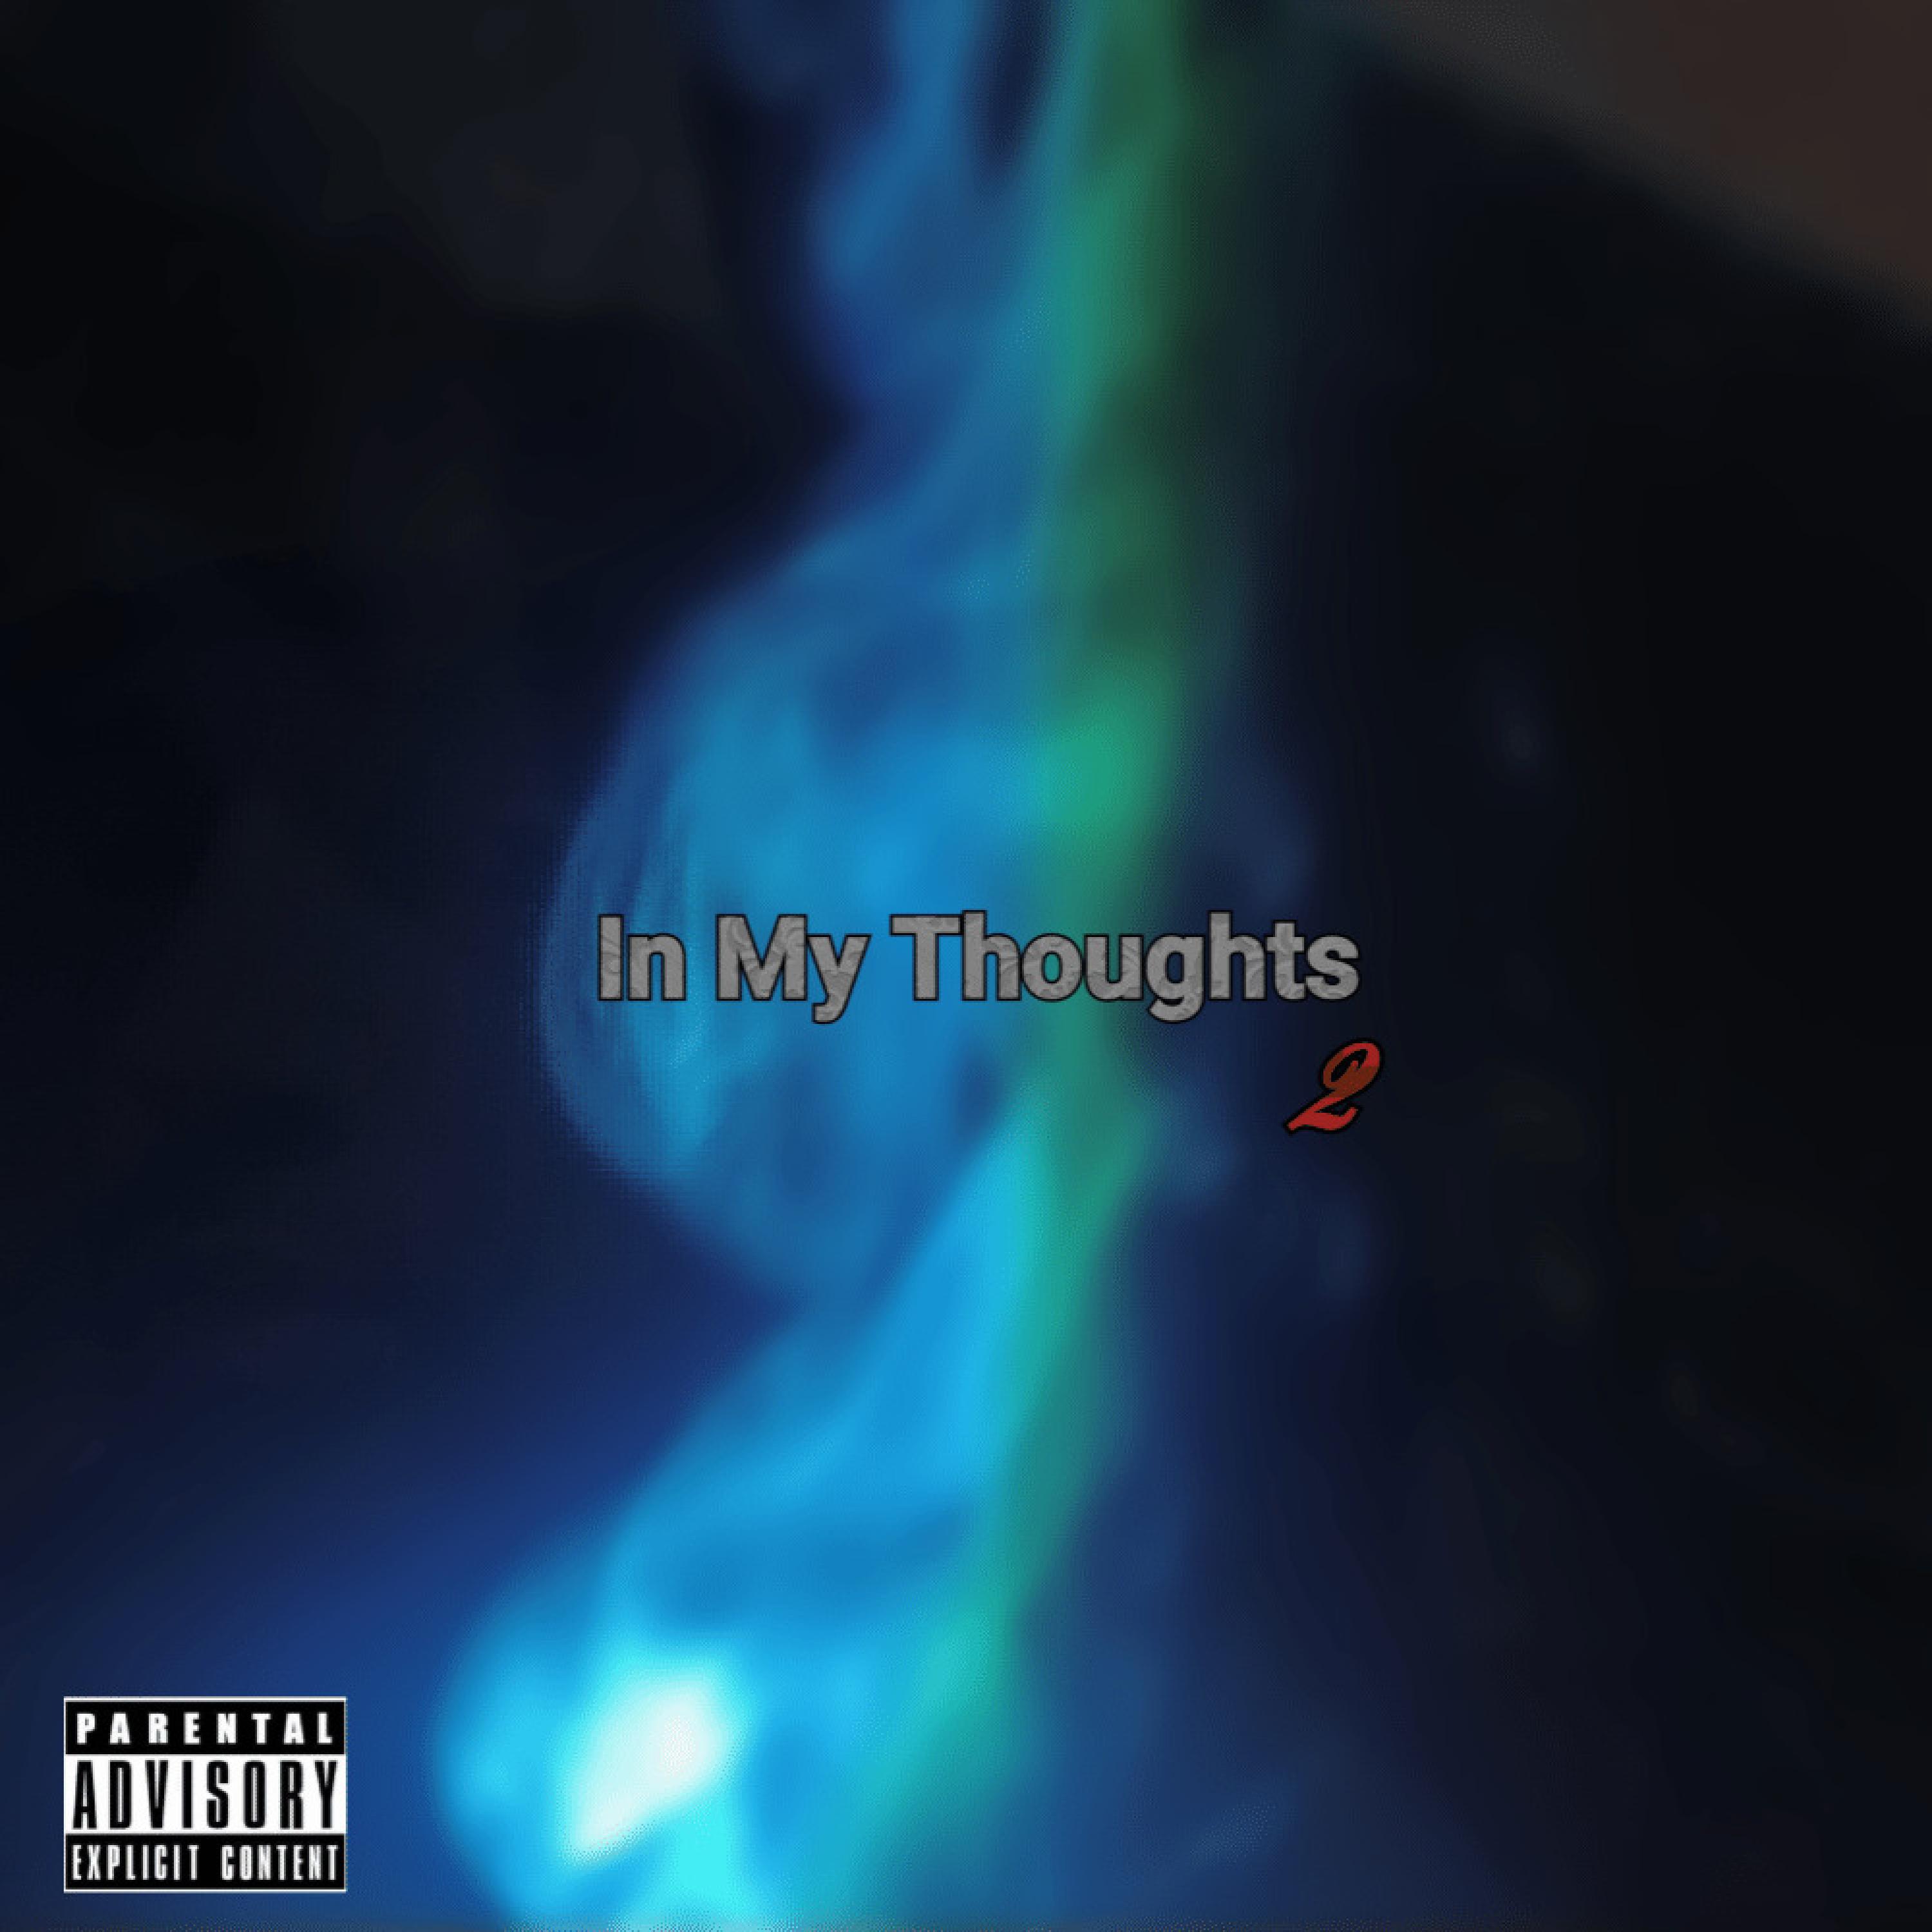 TG - Thoughts In My Mind